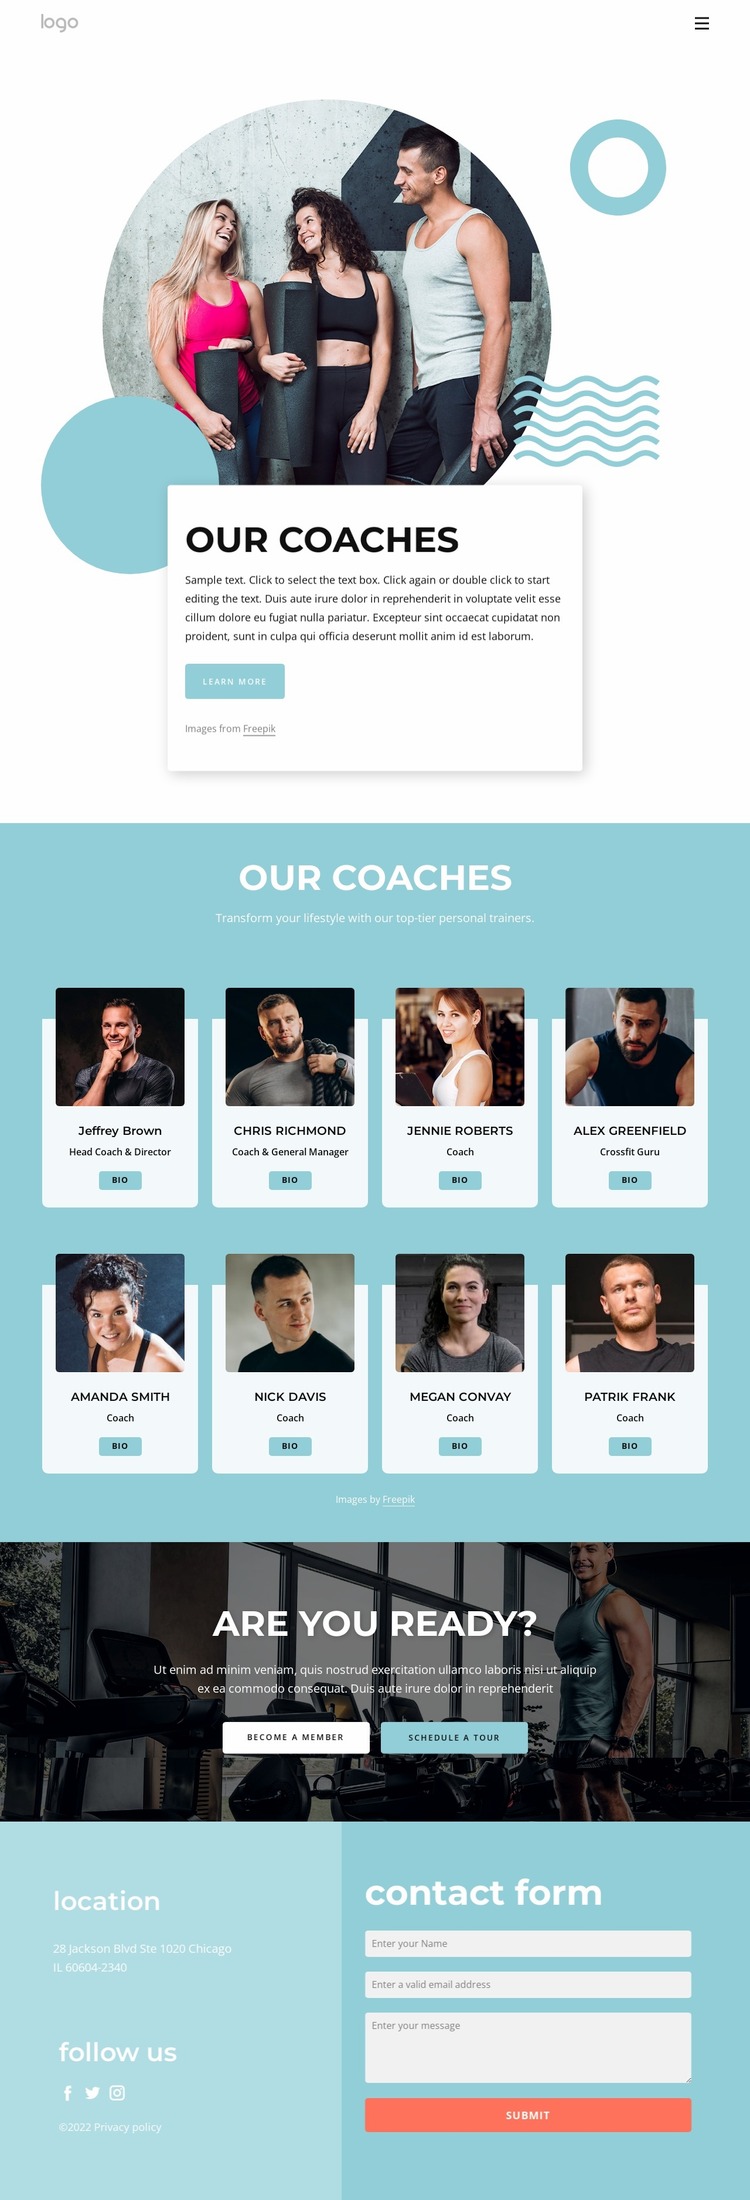 Our Coaches Website Mockup